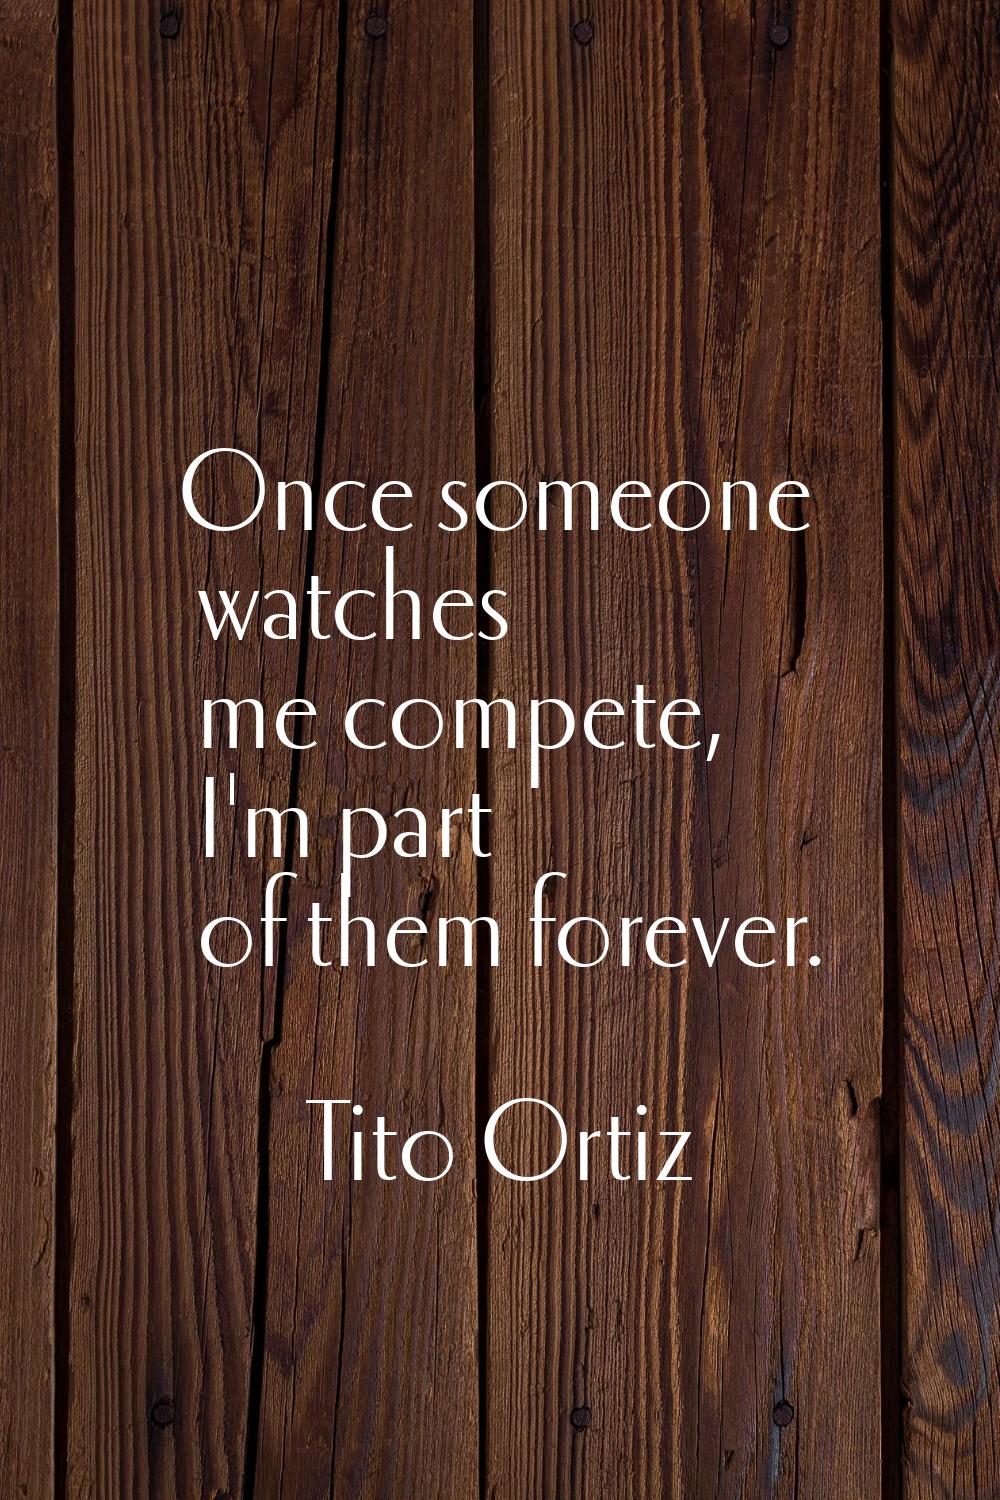 Once someone watches me compete, I'm part of them forever.